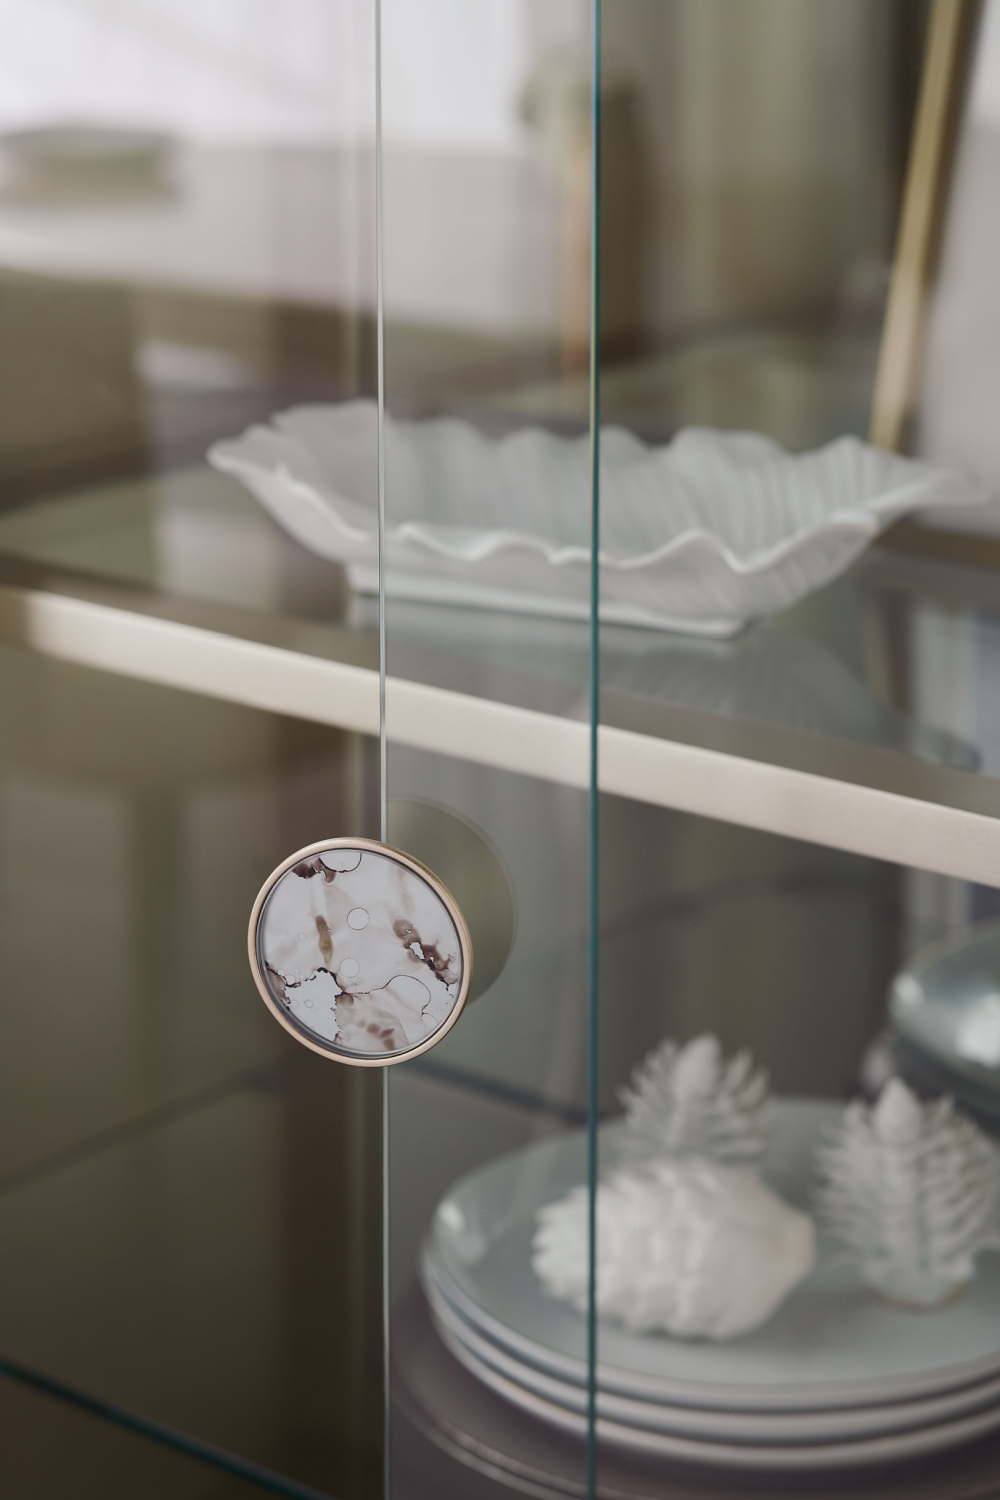 Silver Leaf Display Cabinet | Caracole Time To Reflect | Oroa.com